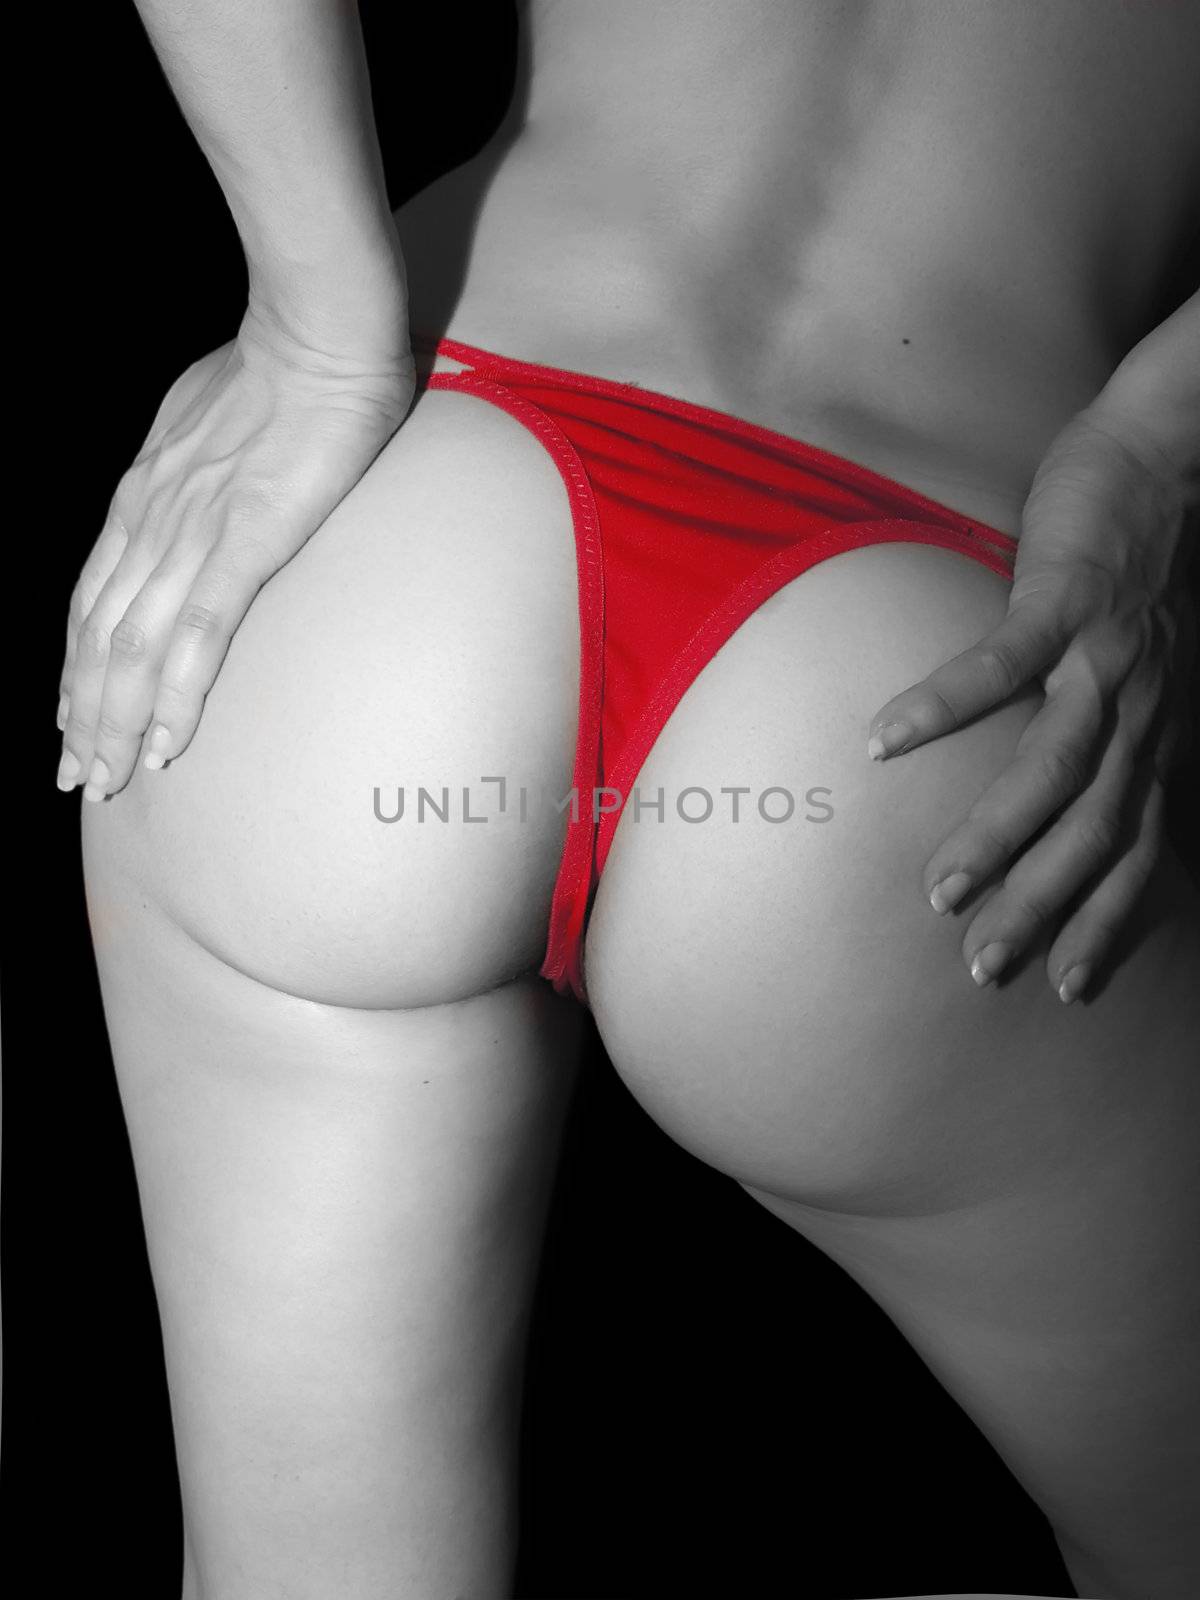 Female model showing off beautiful rear curves